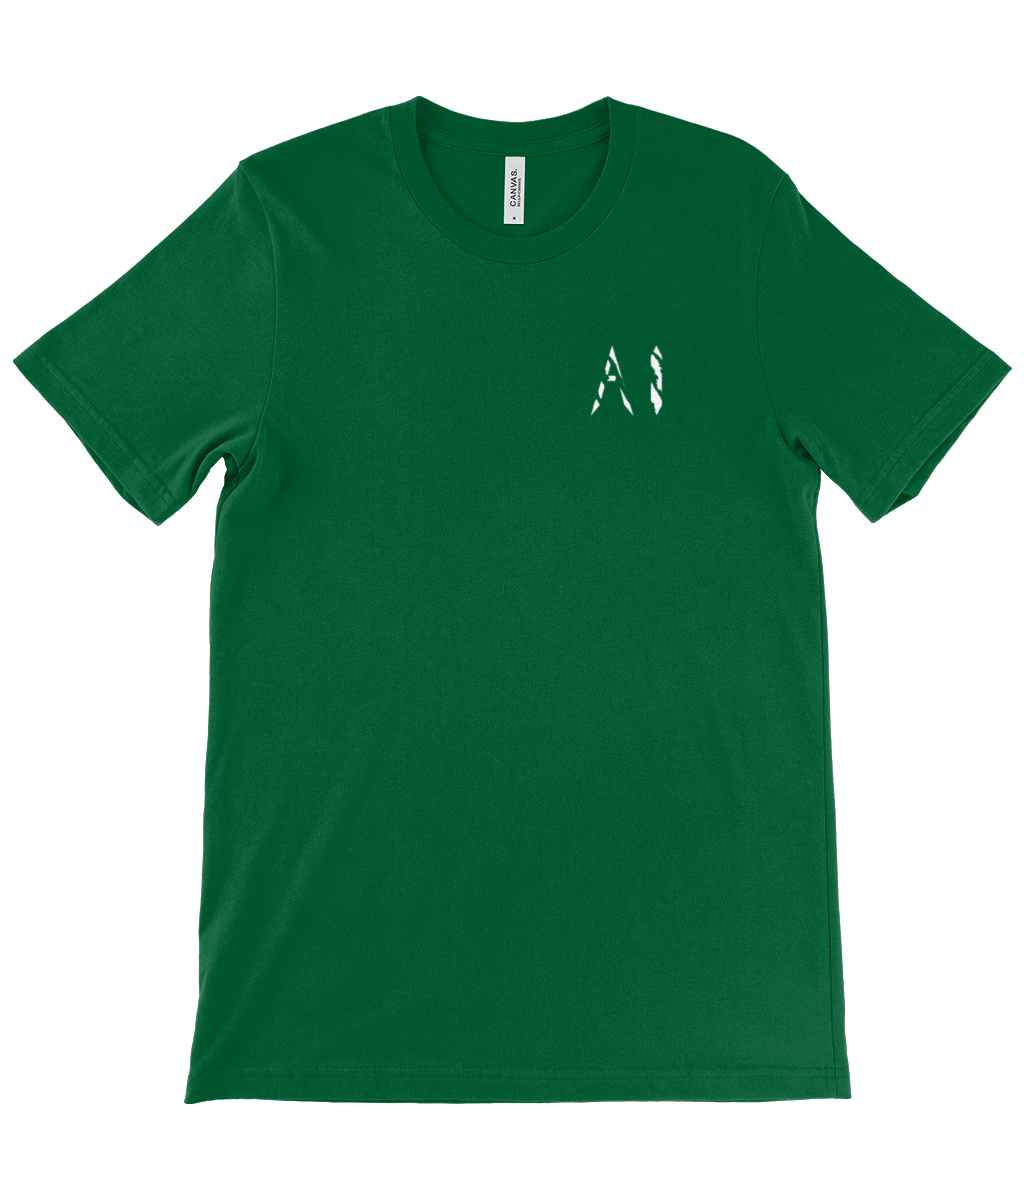 Mens green Casual T-Shirt with white logo on the left chest